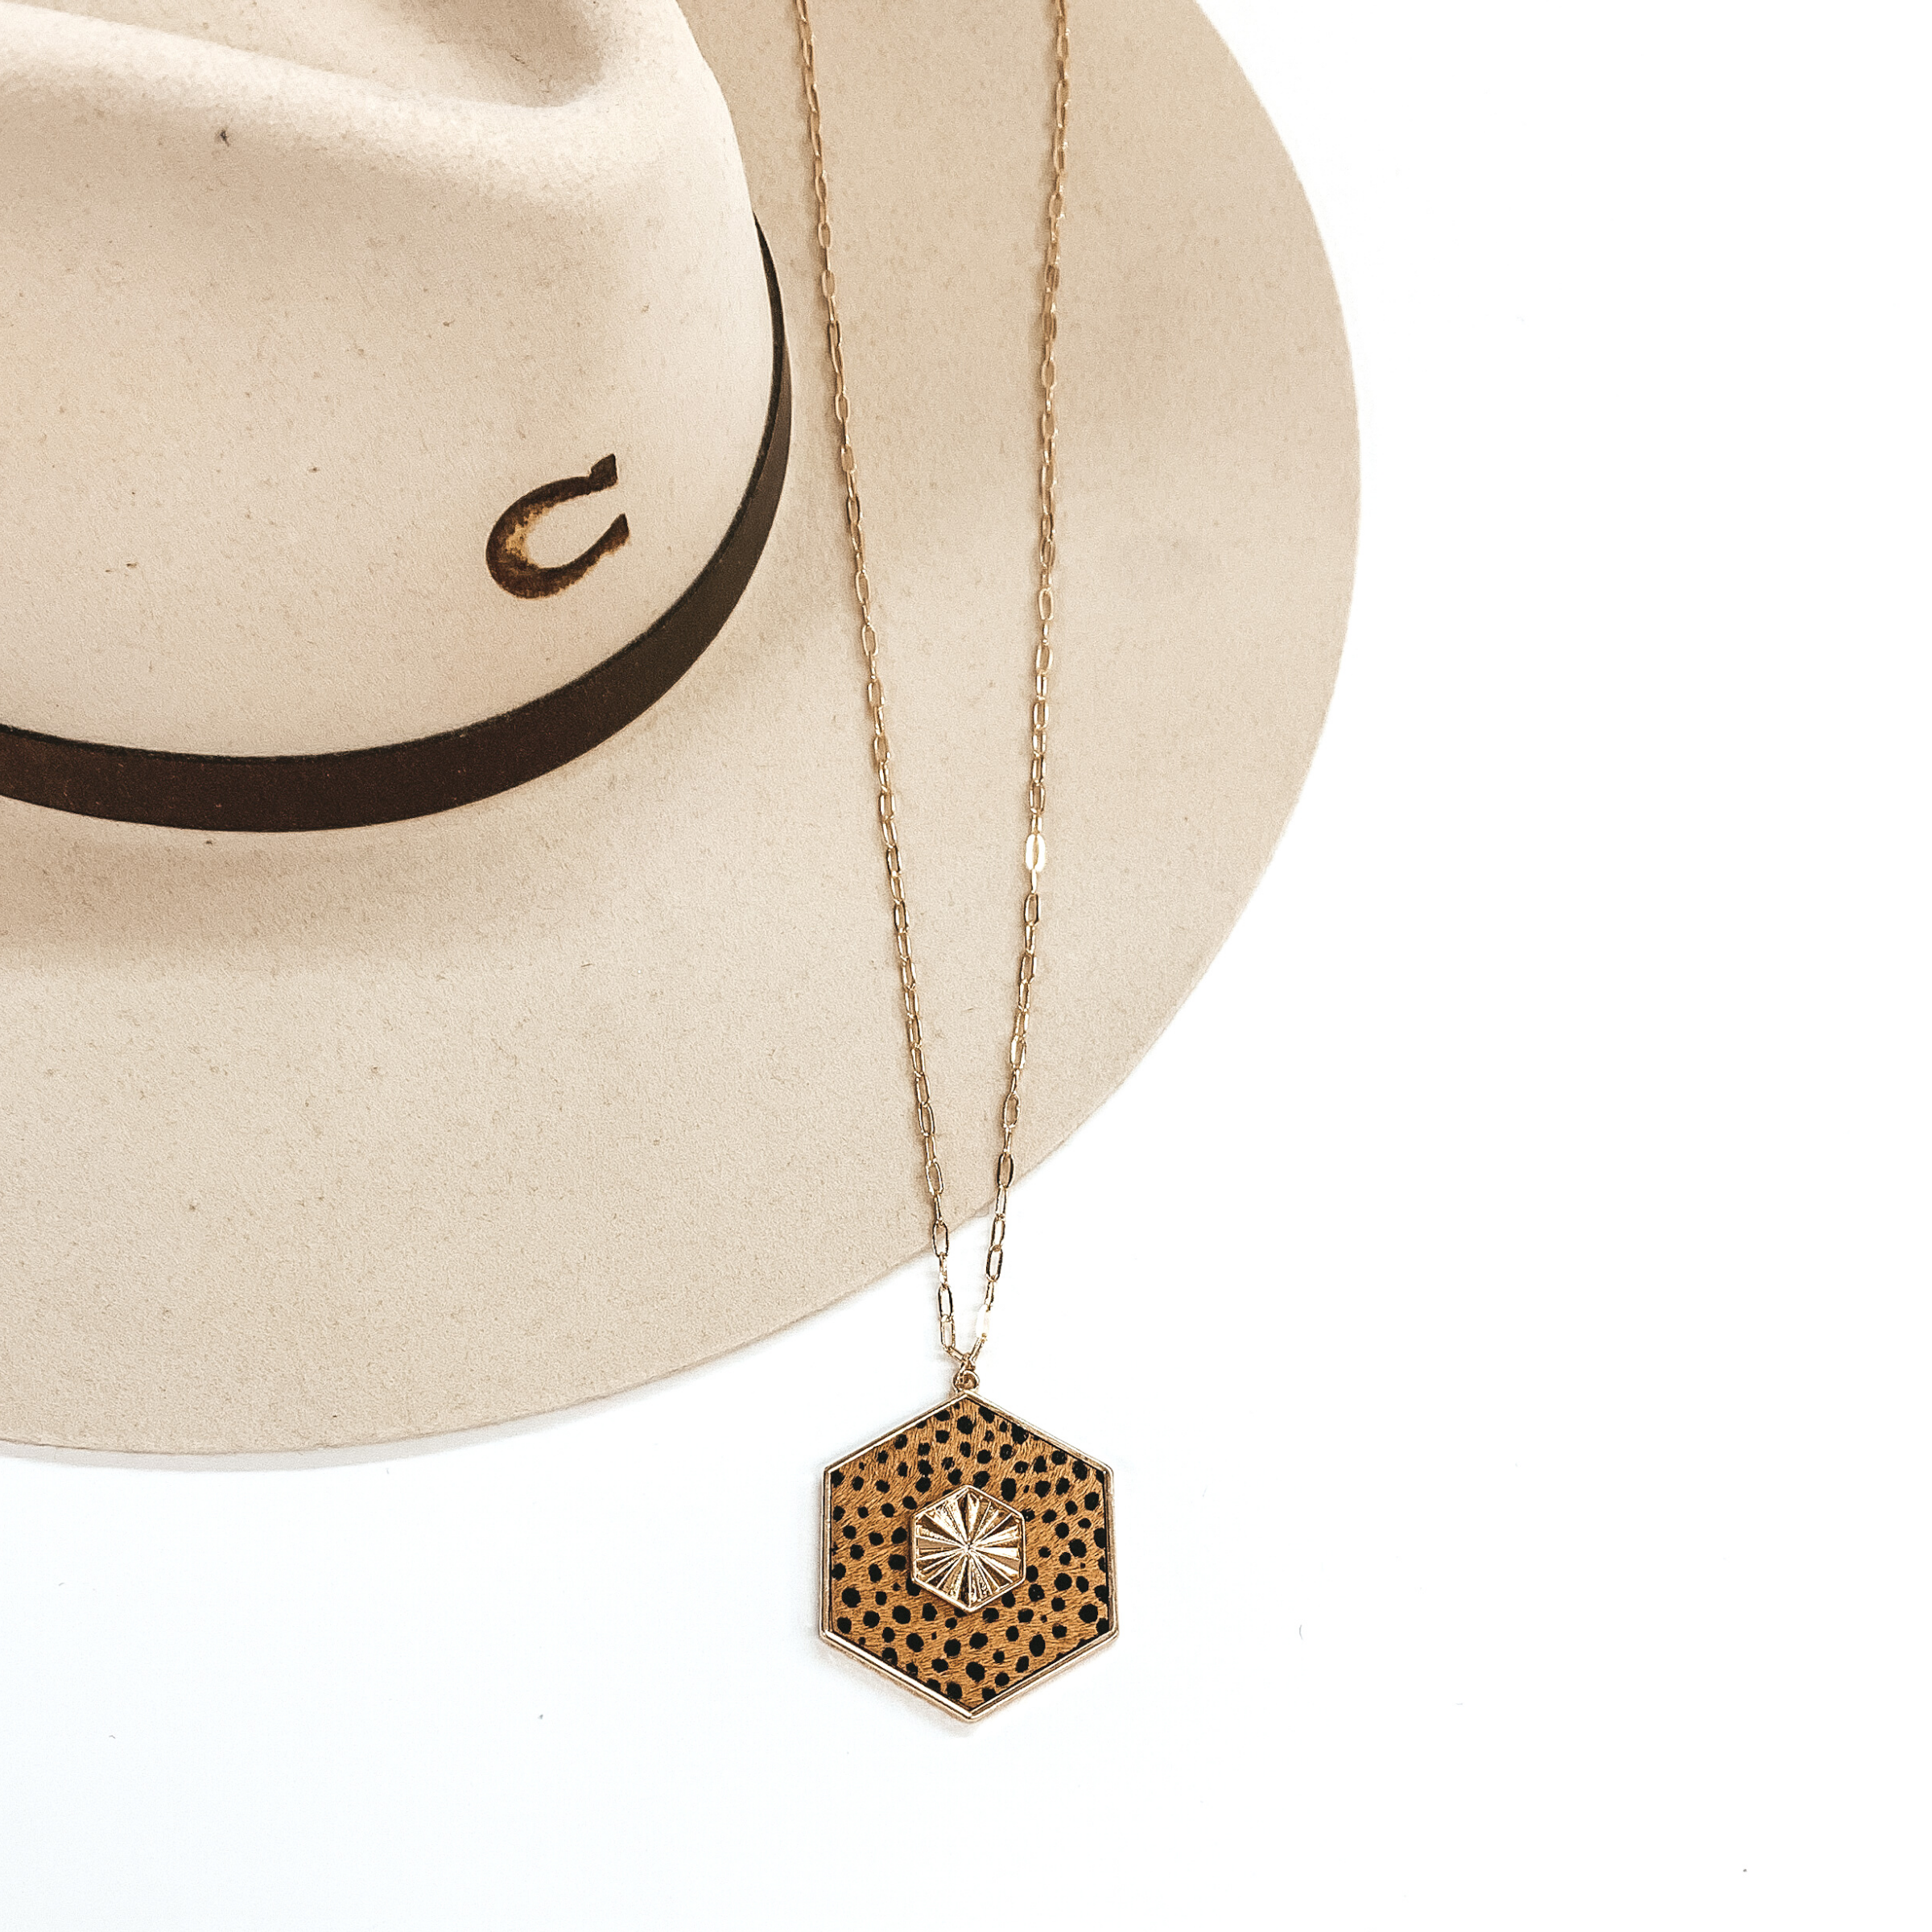 Long Gold Chain Necklace with a Hexagon Pendant in Tan Cheetah Print - Giddy Up Glamour Boutique